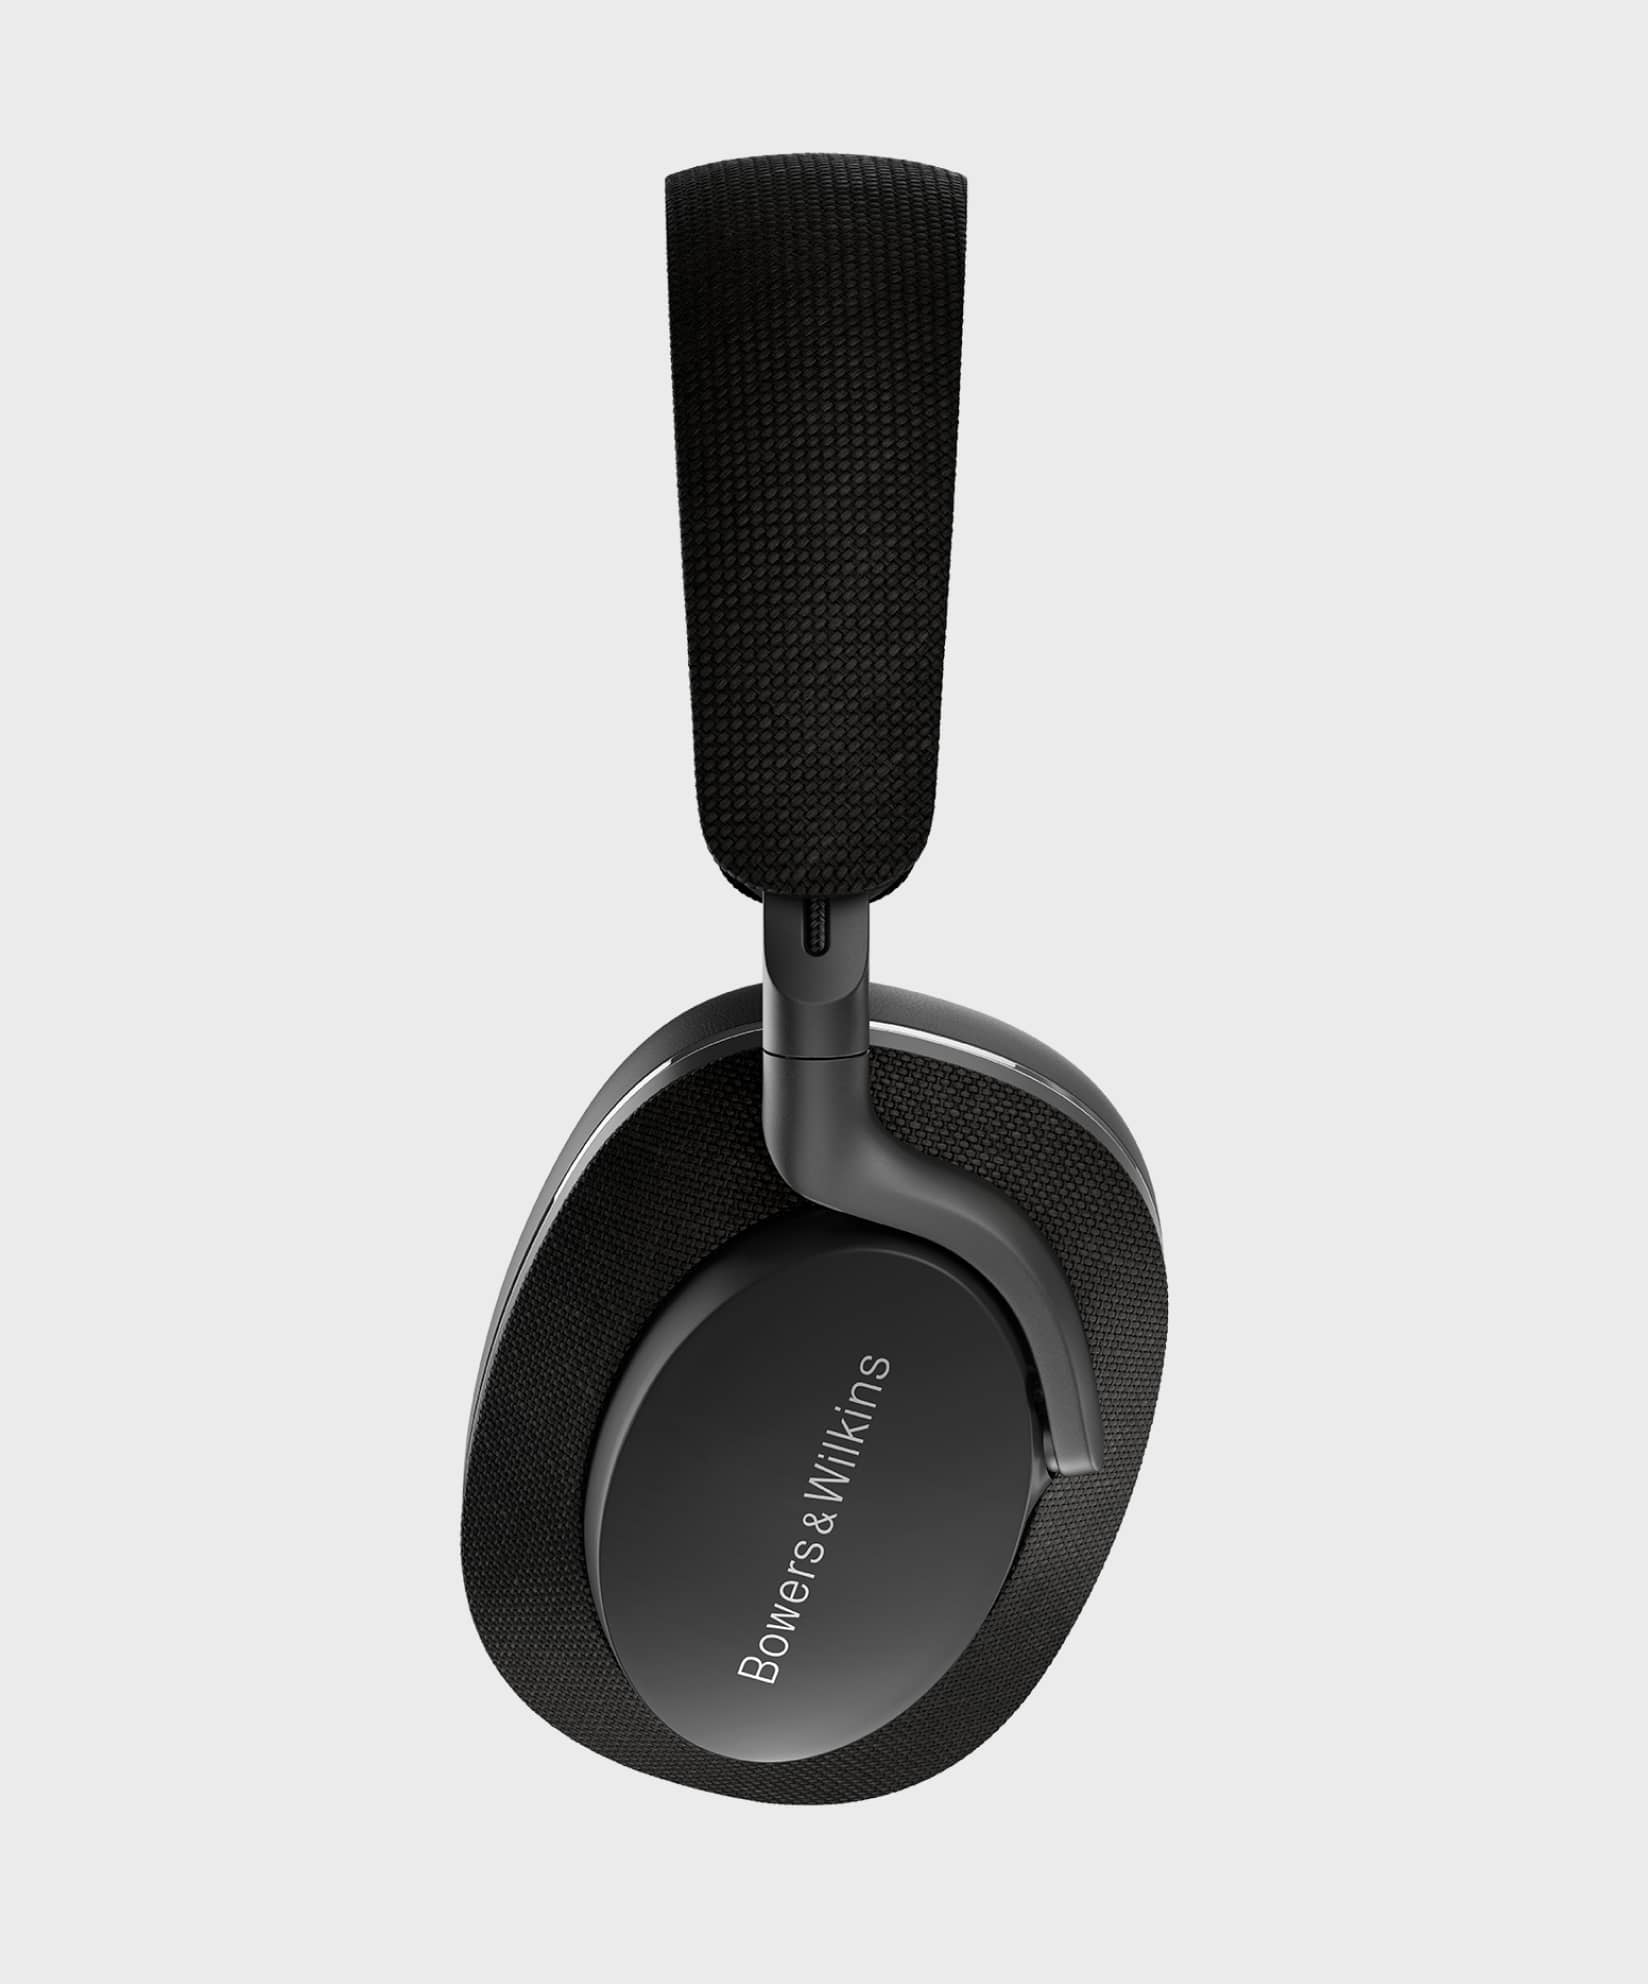 Px7 S2 Over-ear noise cancelling headphones | Bowers & Wilkins